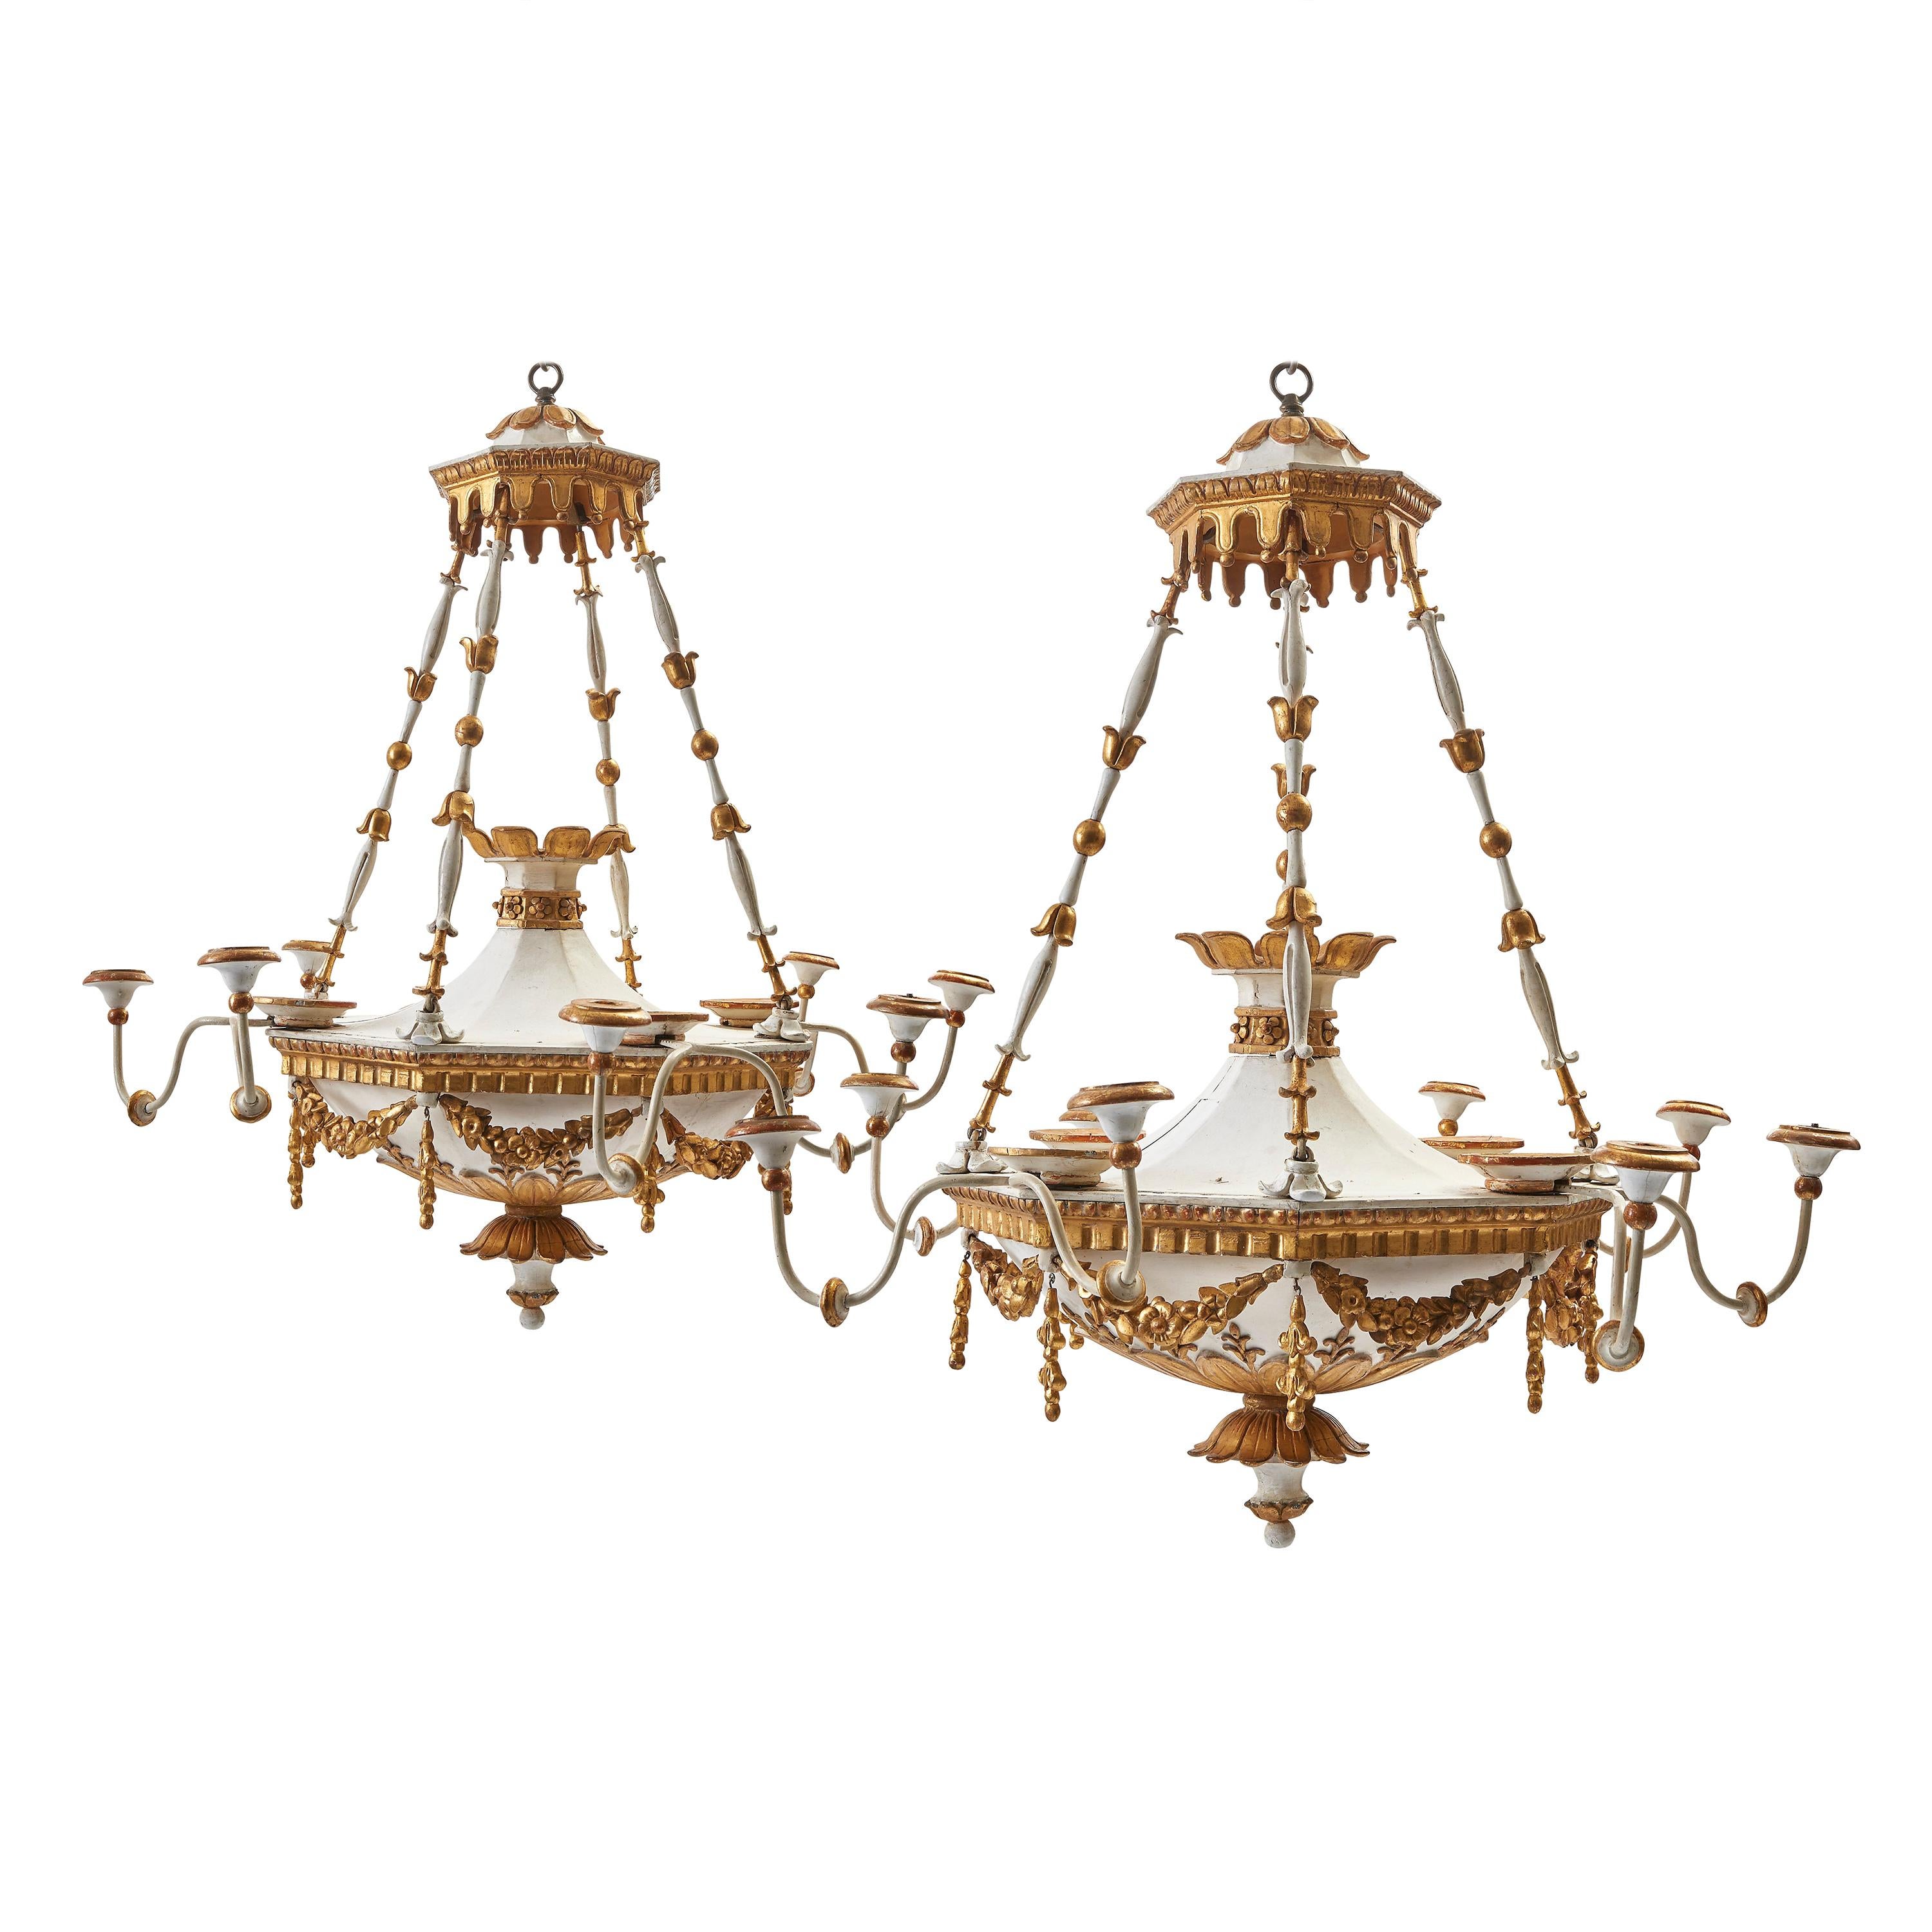 Pair of Scandinavian Neoclassical Gilt and Painted Chandeliers, circa 1810